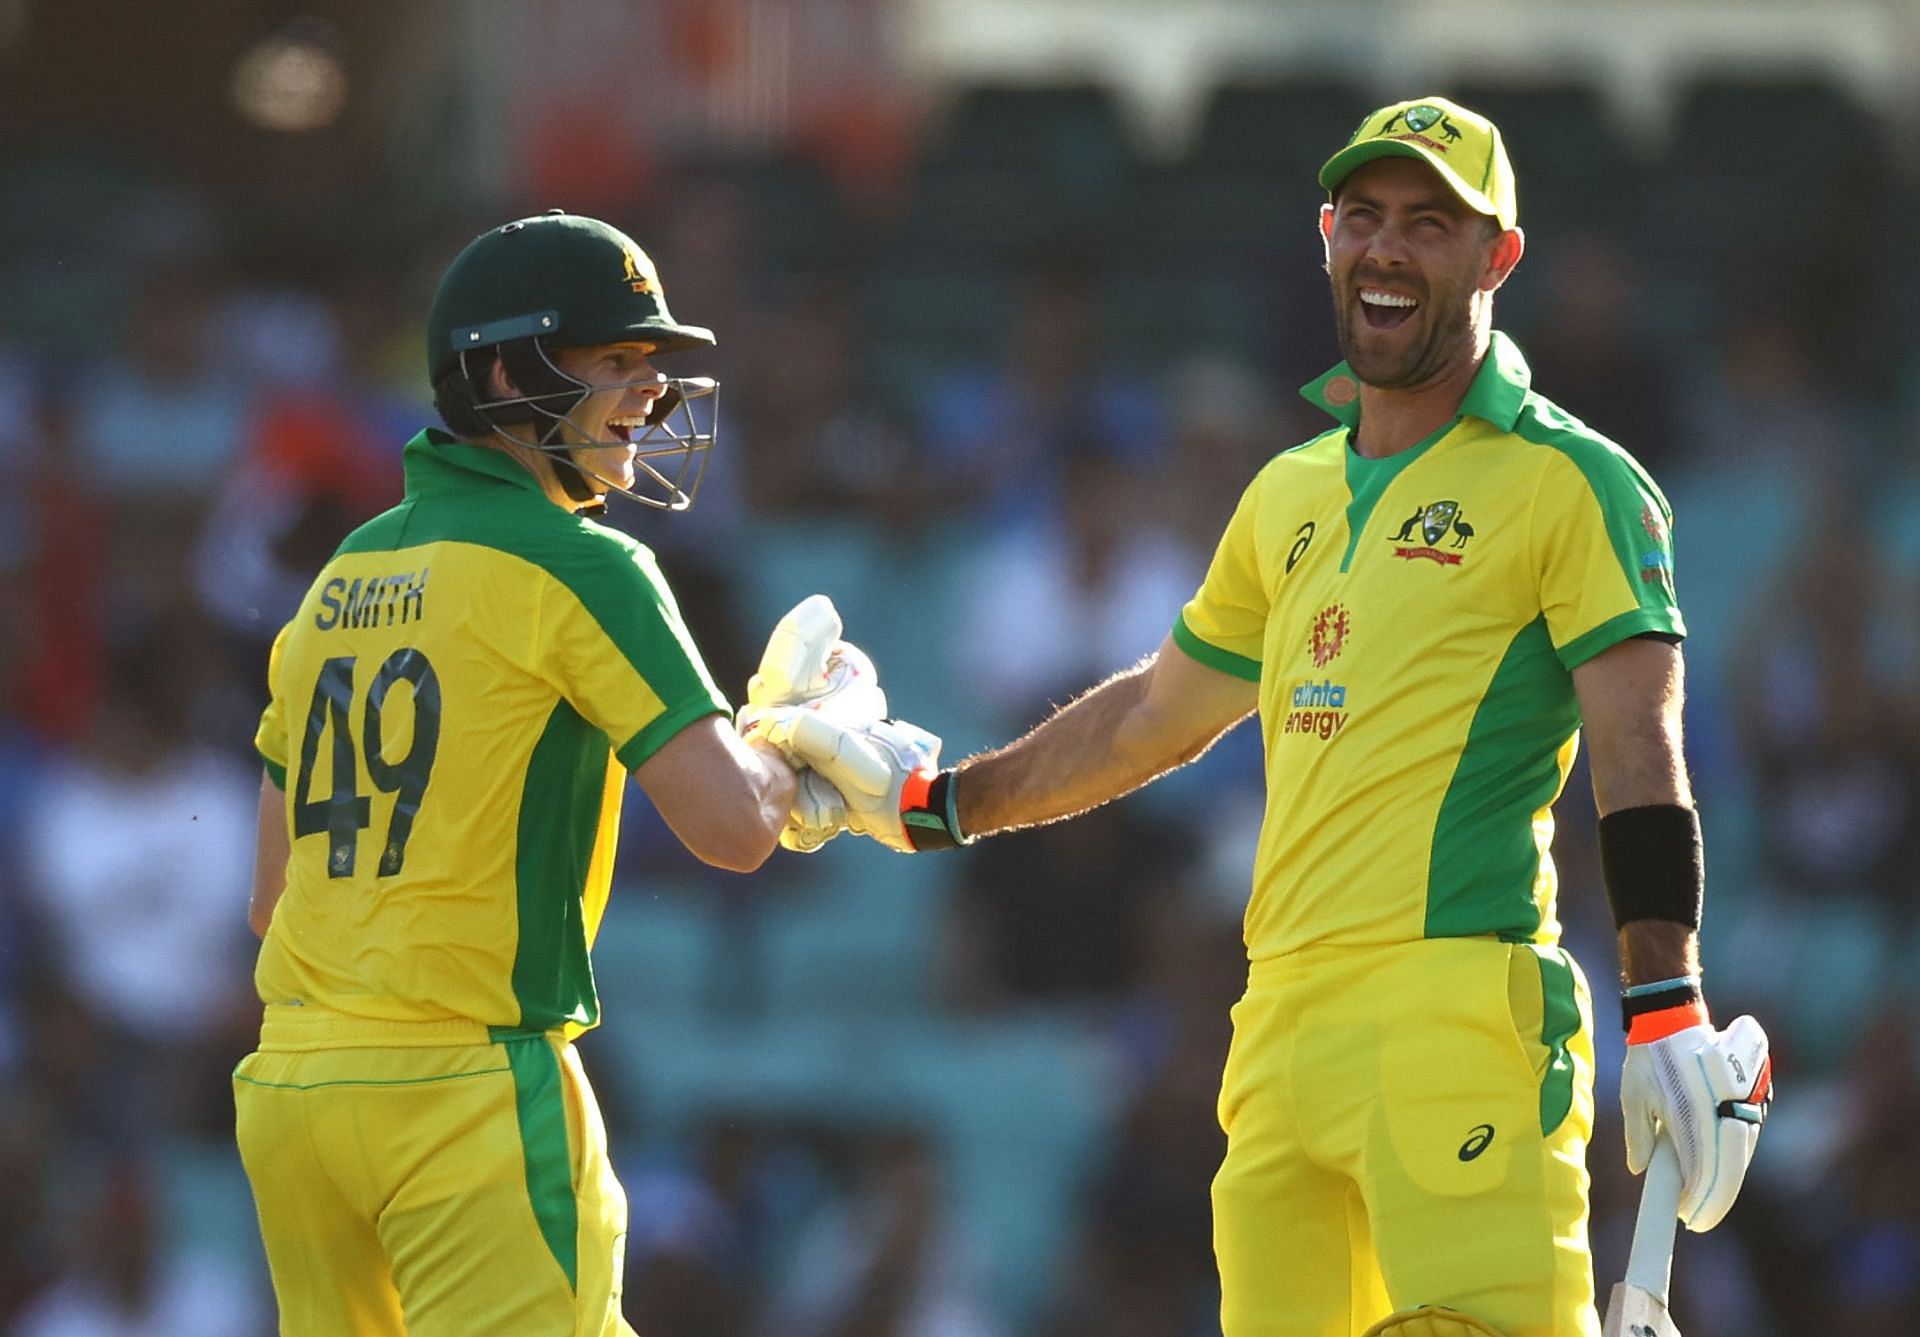 Steve Smith (L) up top and Glenn Maxwell (R) in the middle order lend wings to the Australian batting composition (File image).